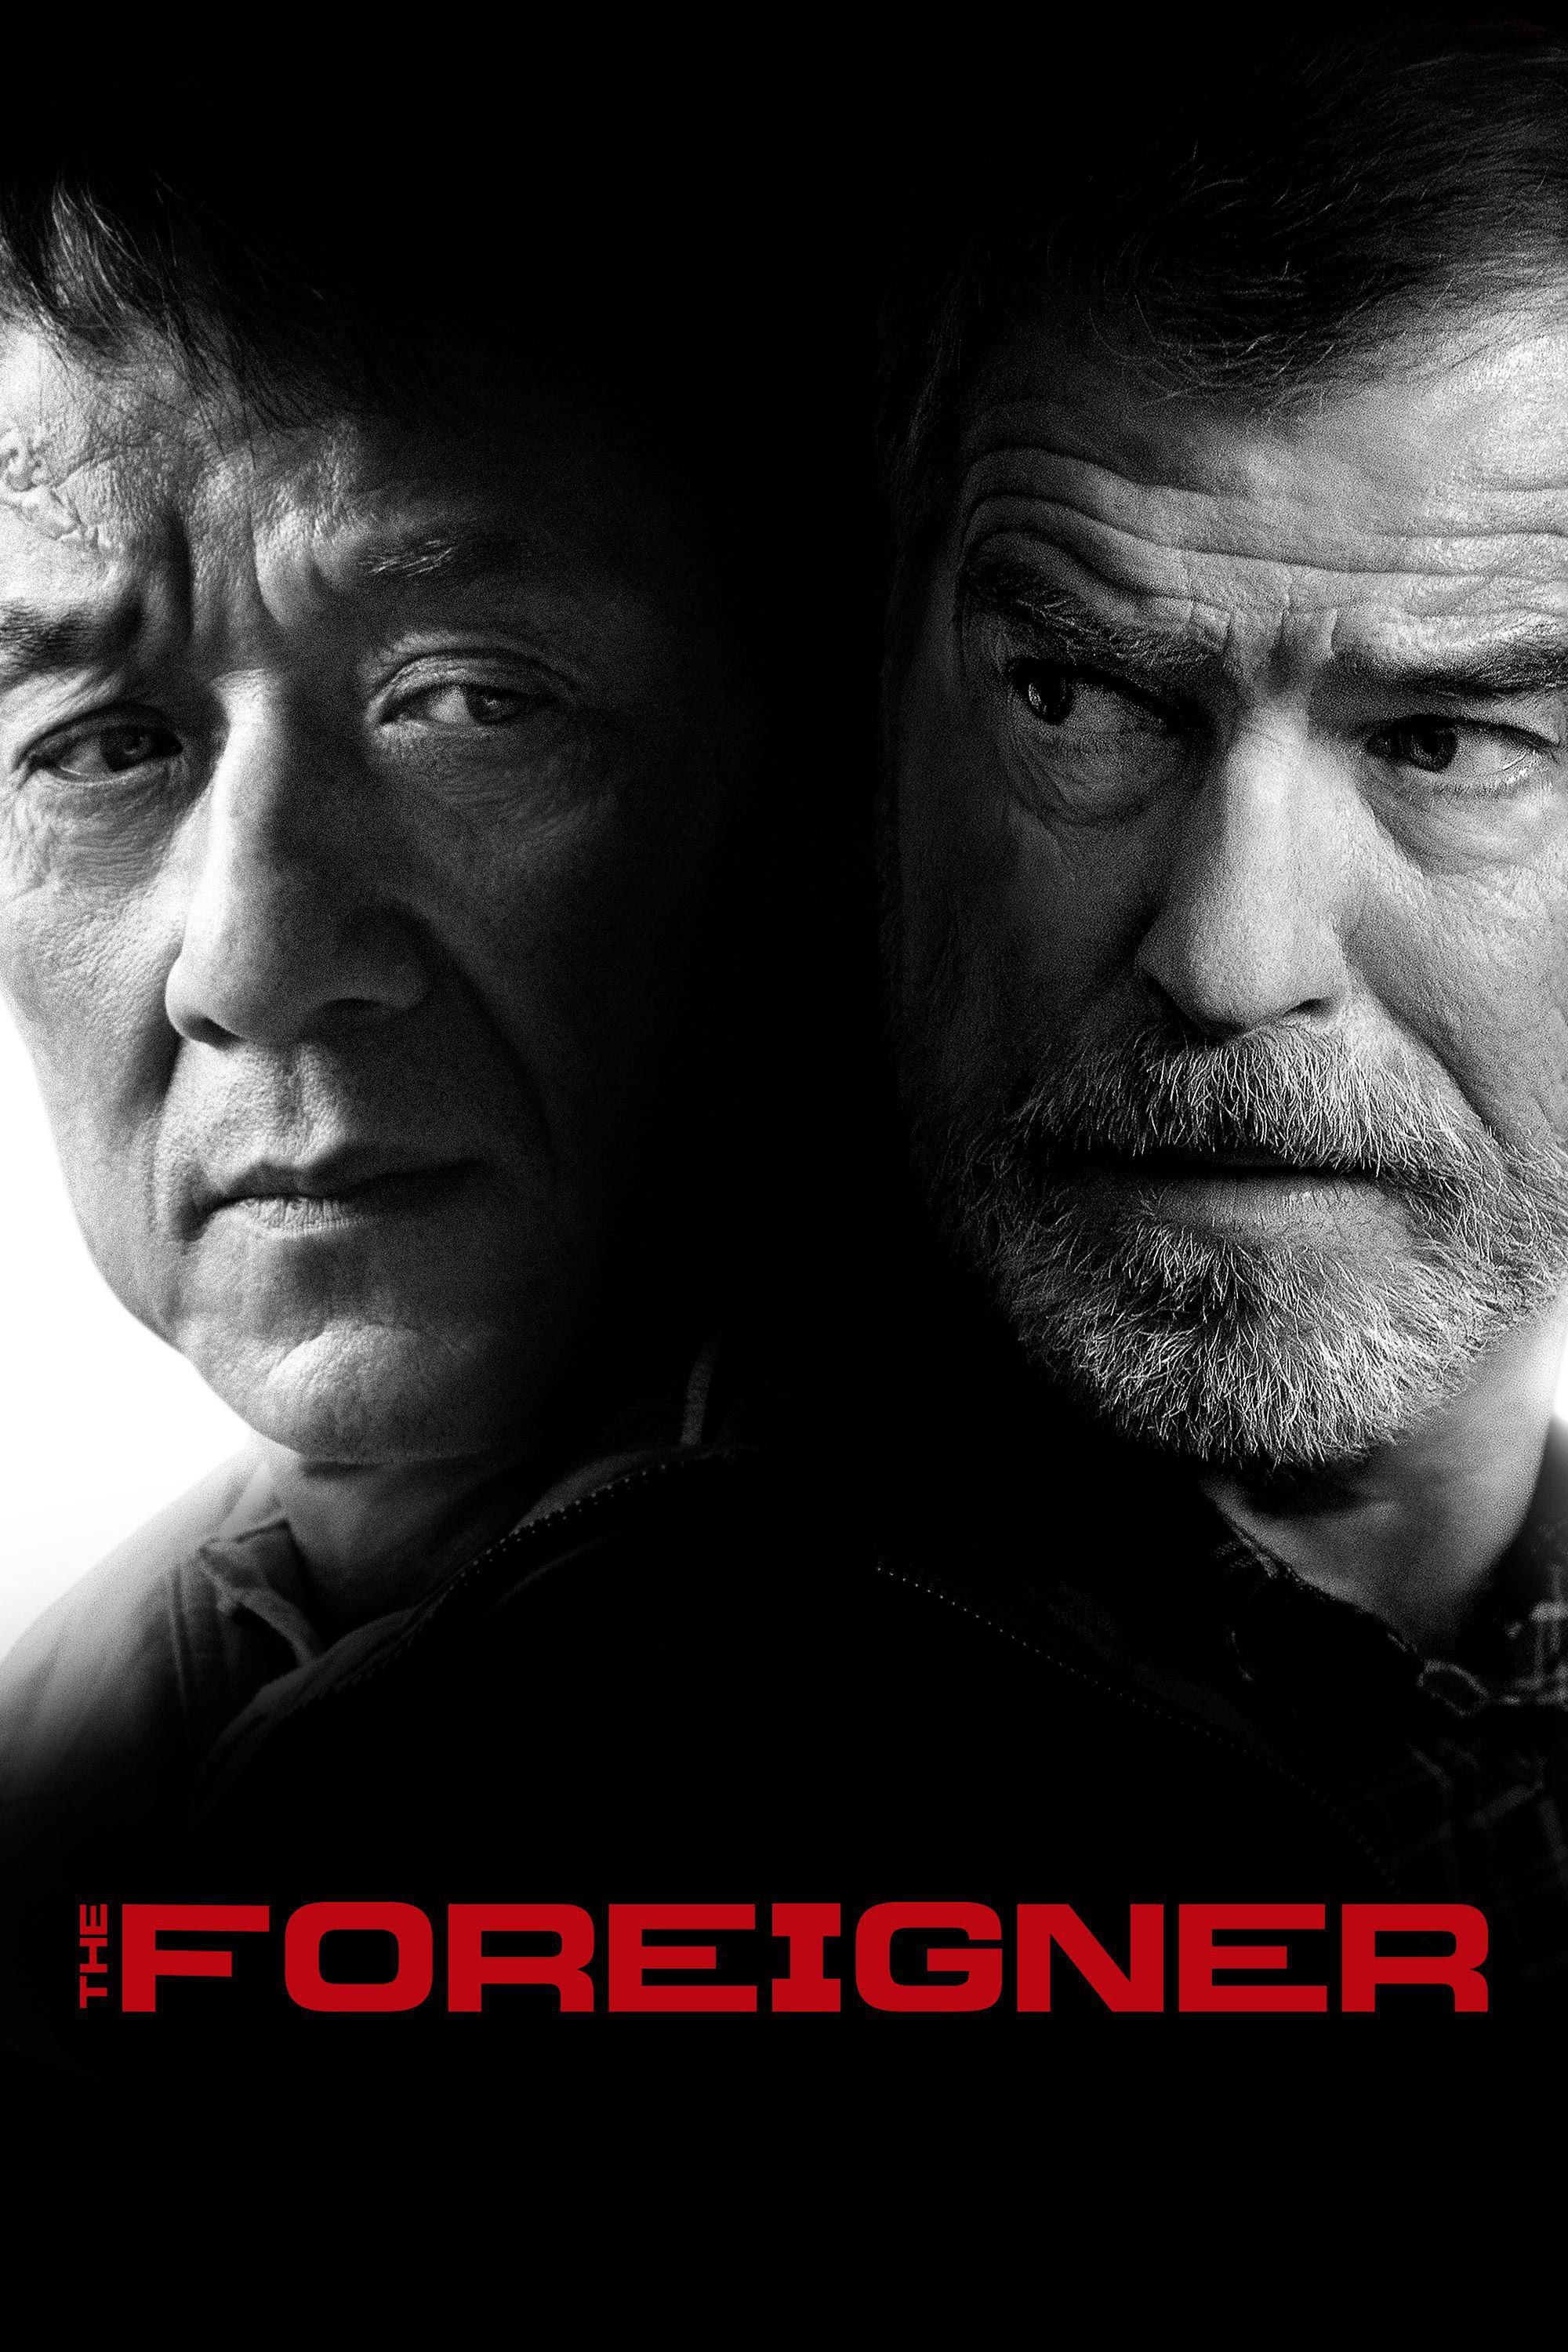 the foreigner hollwood move daul audio download fhlmywap